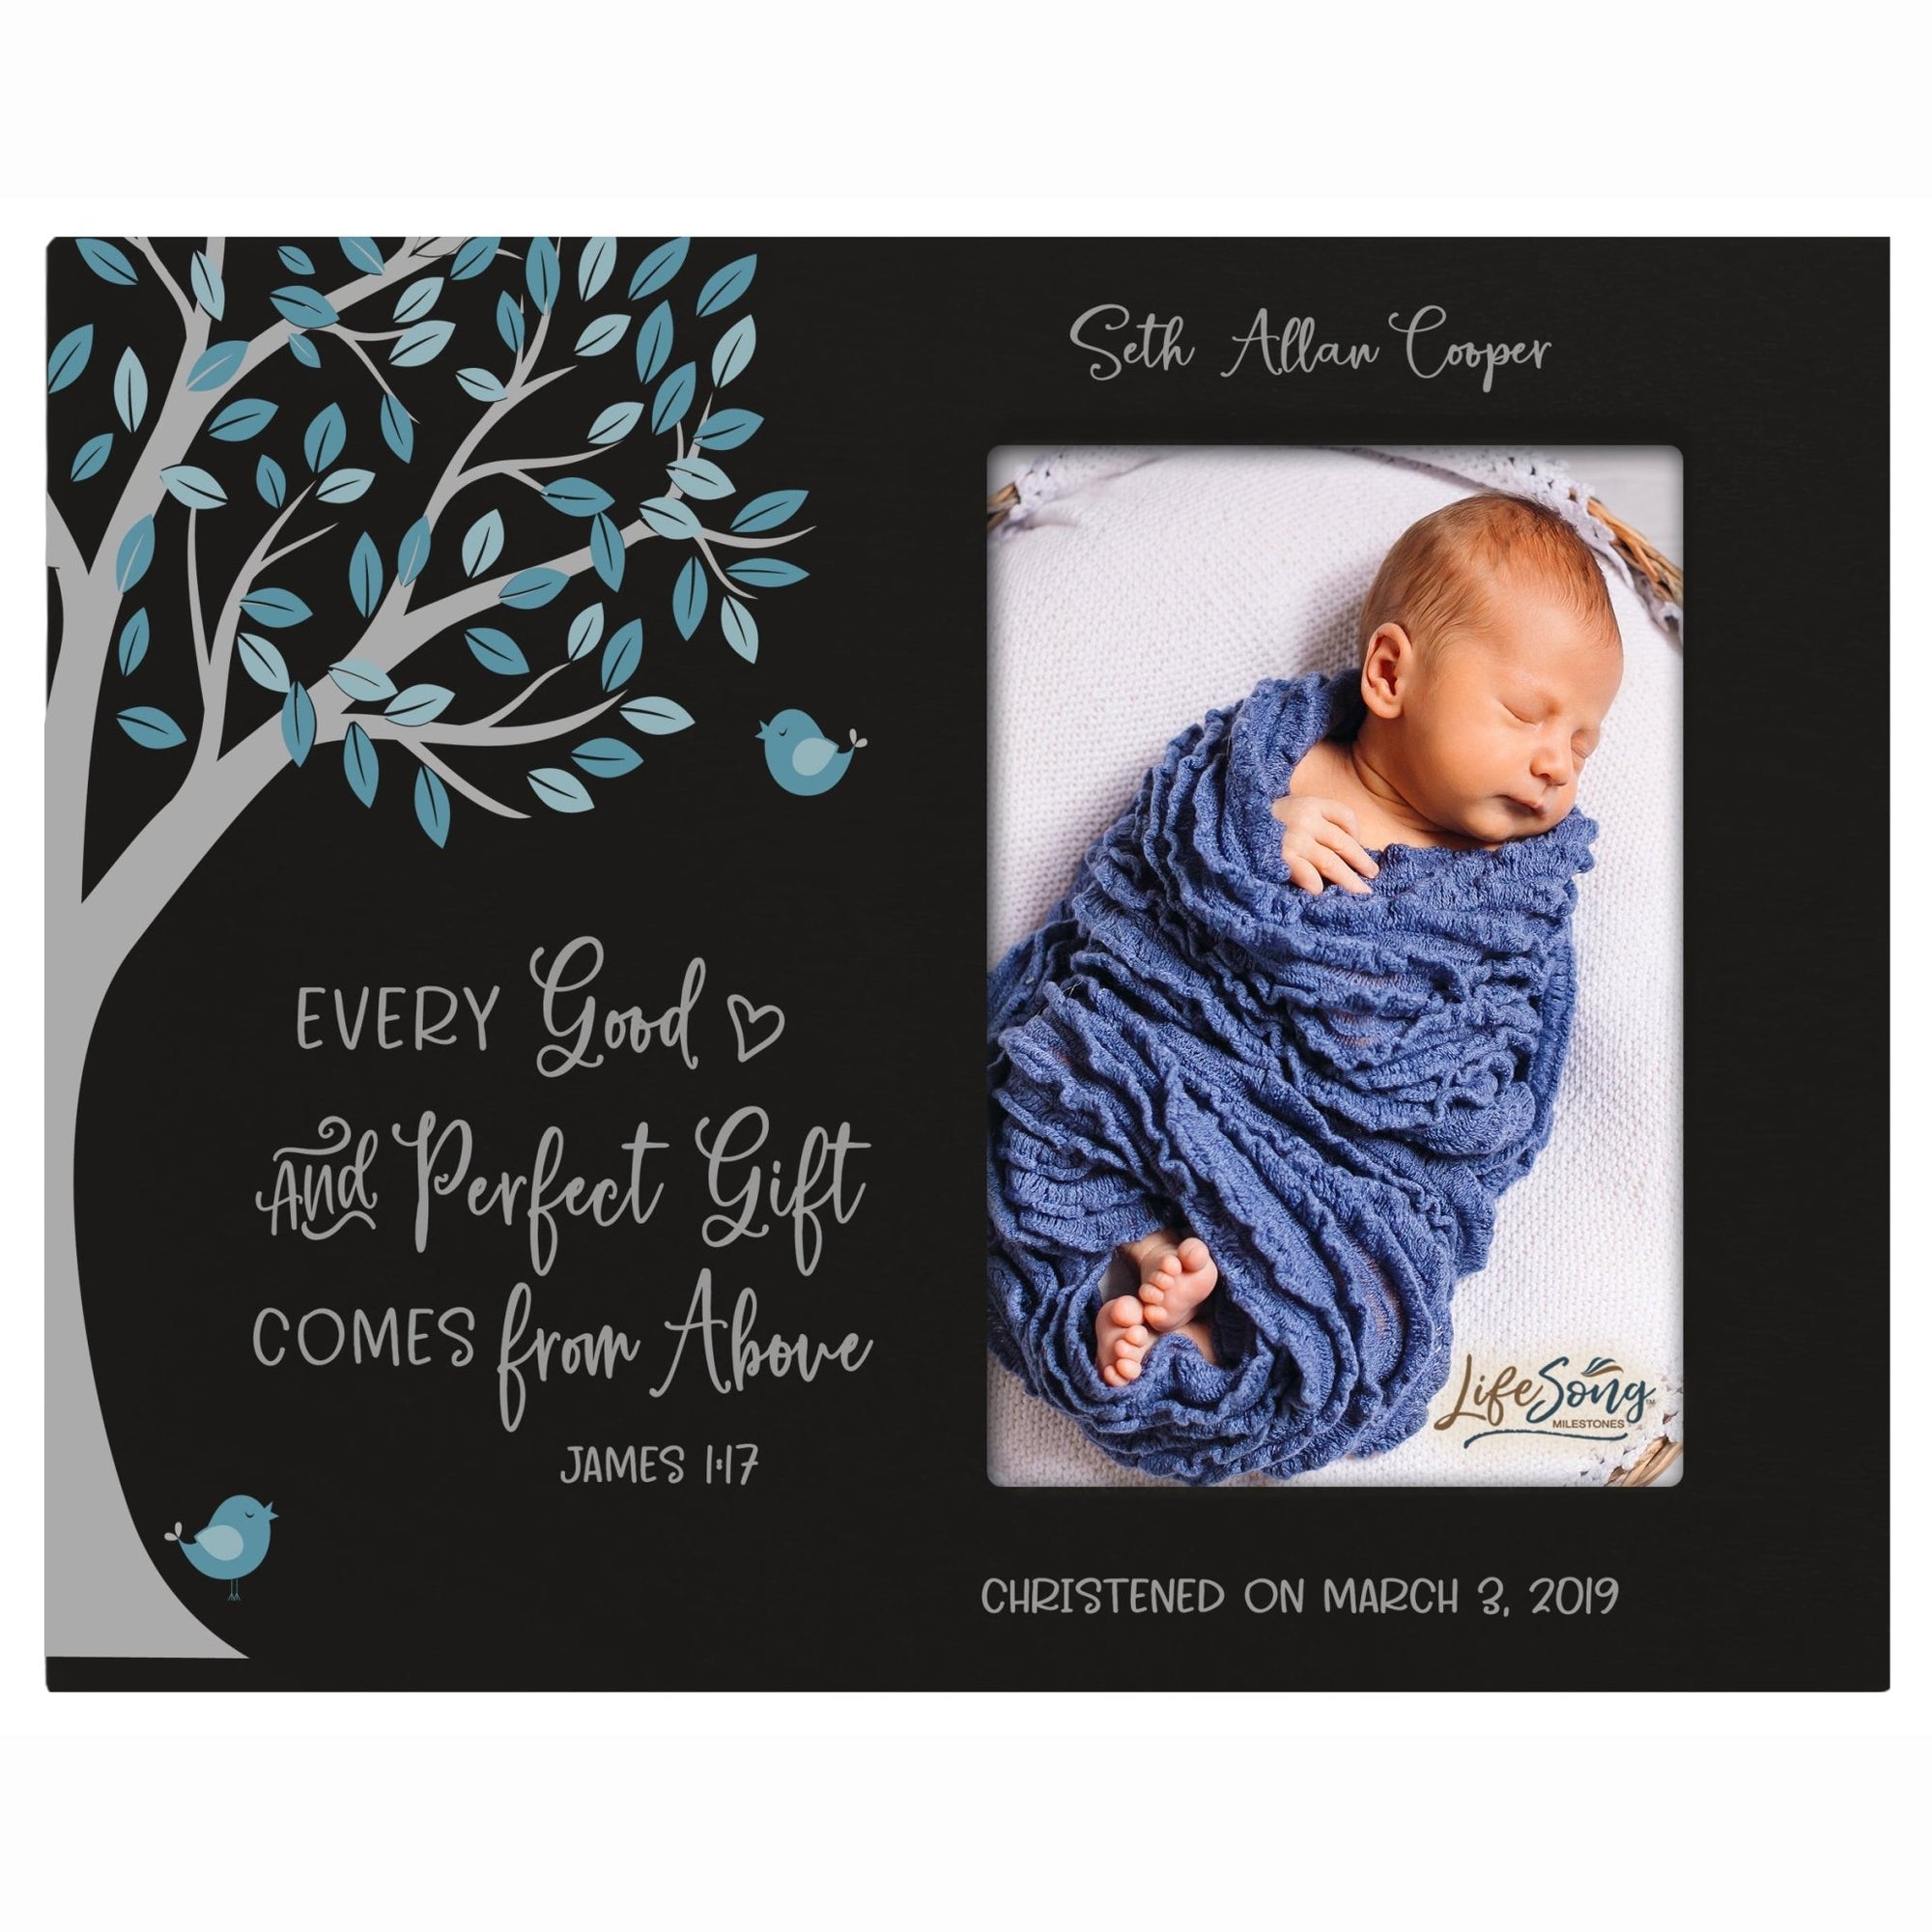 Personalized Baptism Blessing Gift Frame For Newborn Good and Faithful - LifeSong Milestones